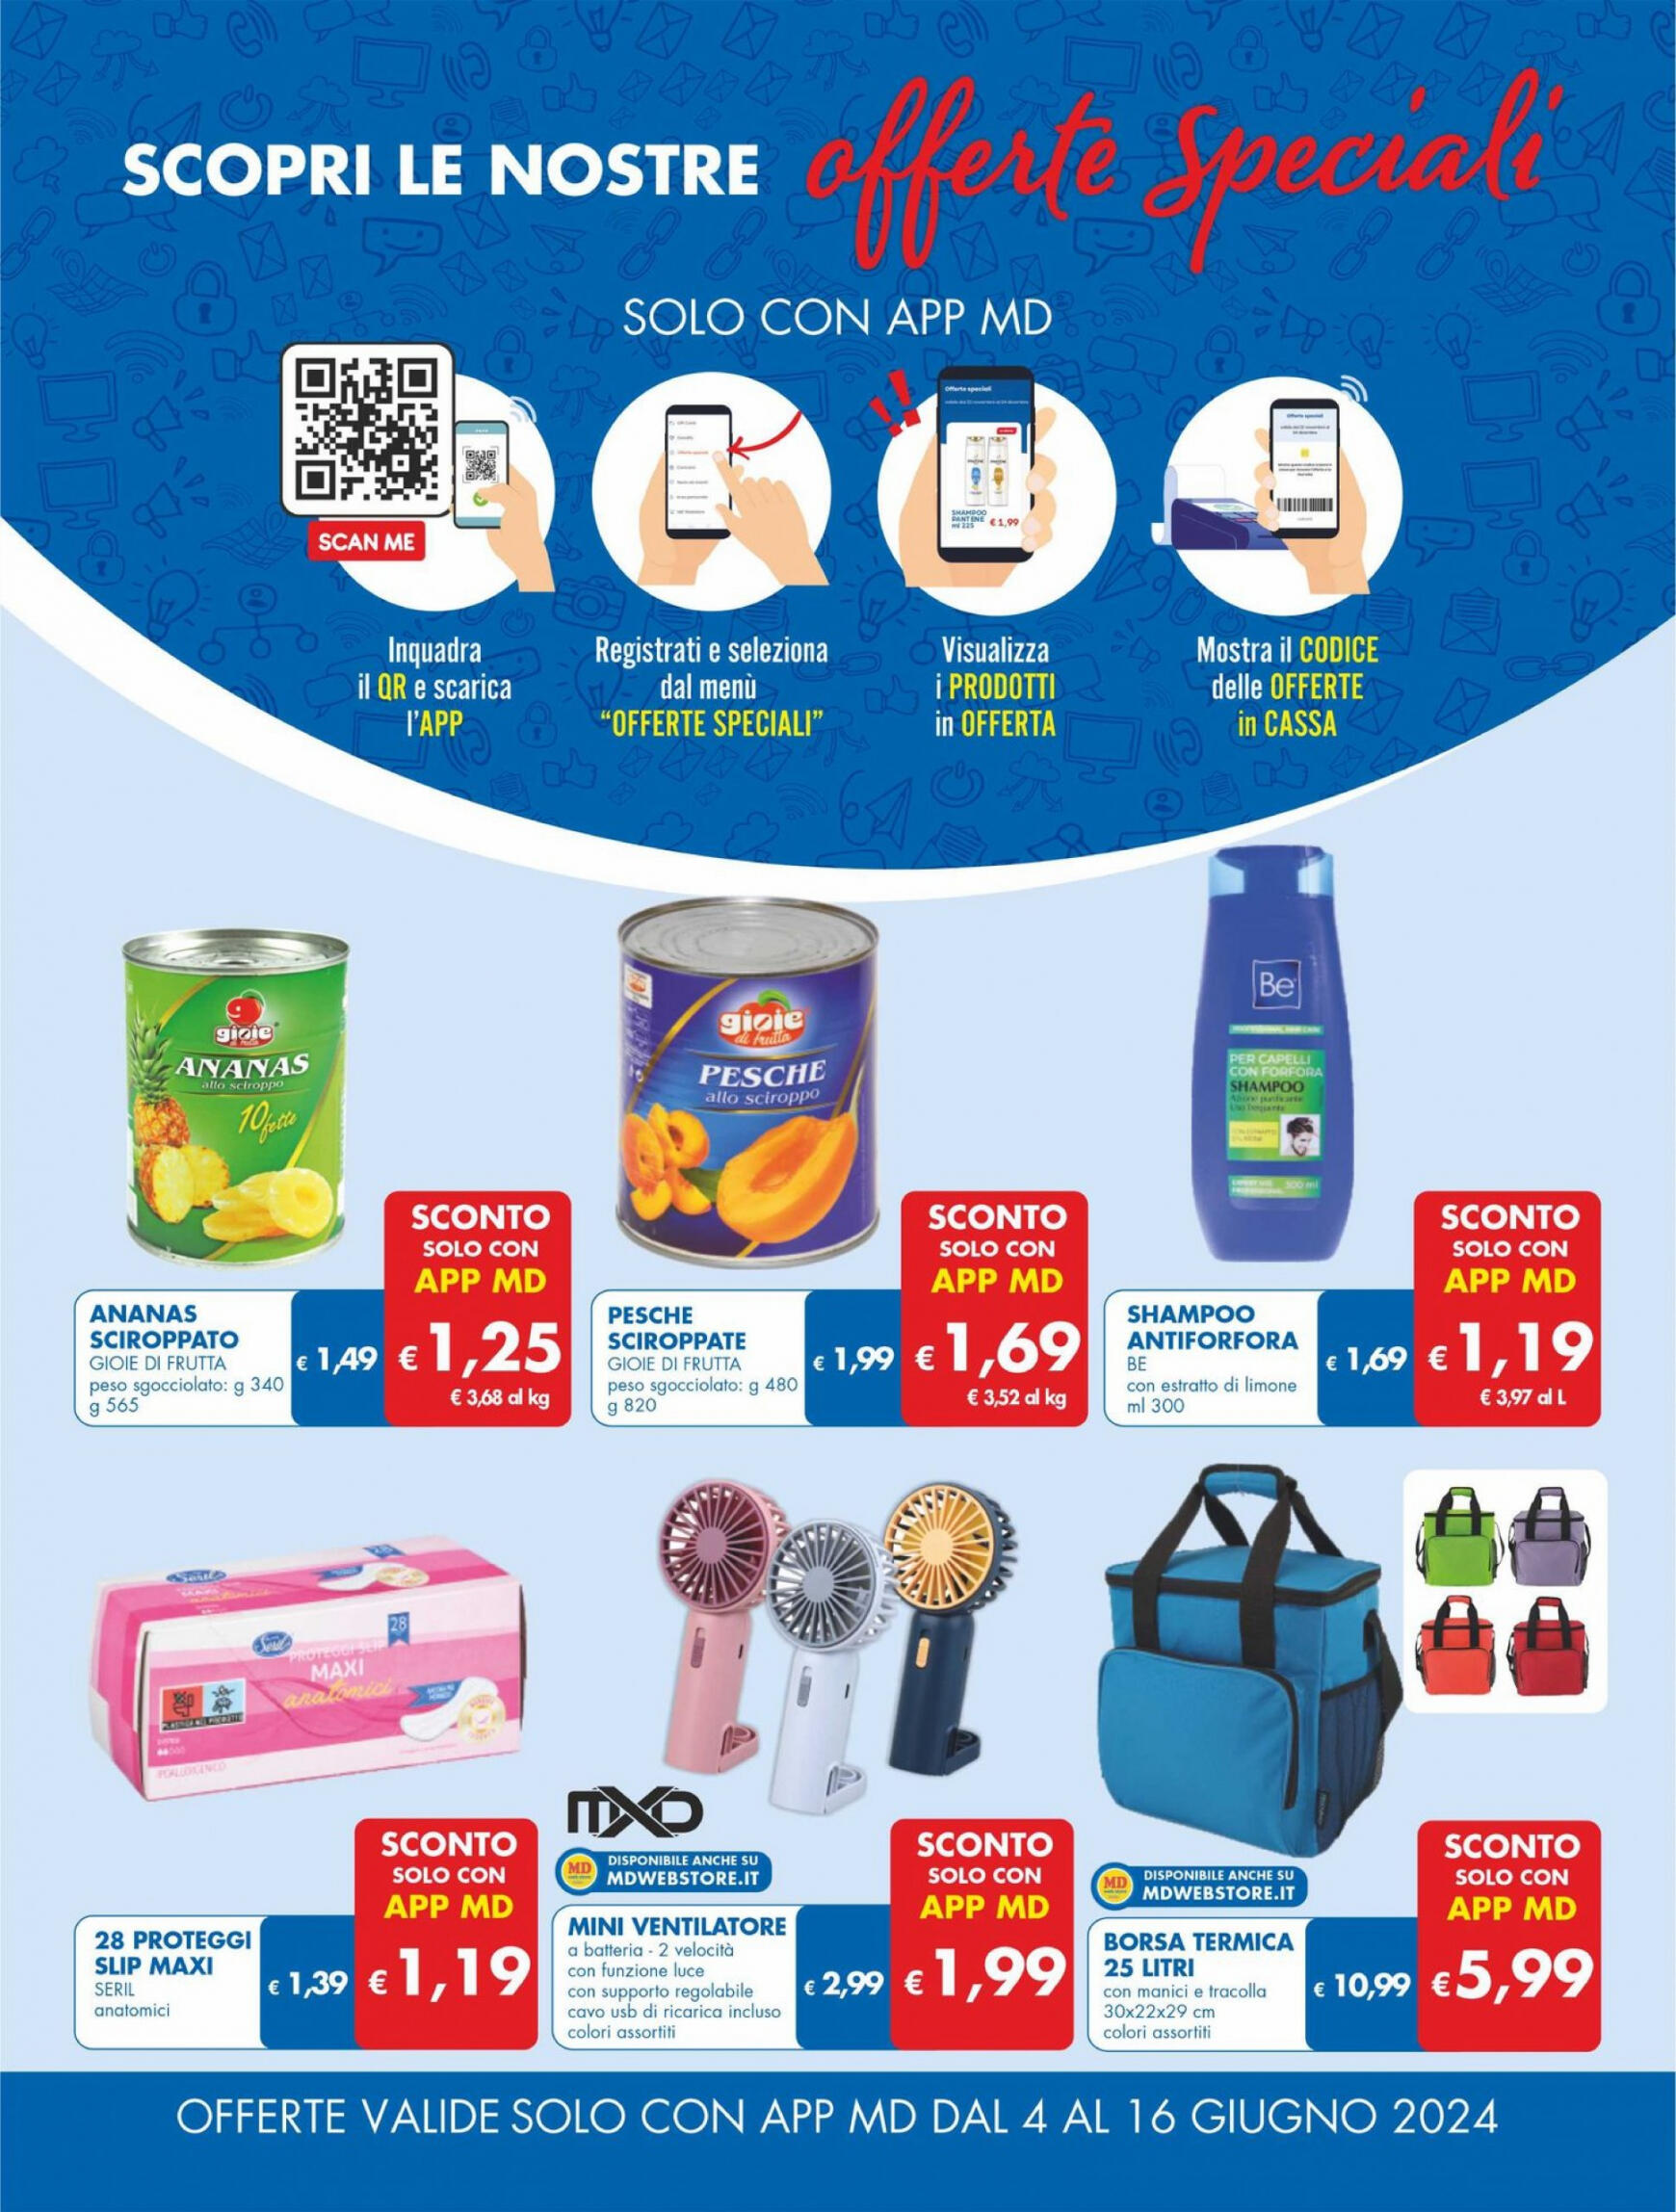 md-discount - Nuovo volantino MD 04.06. - 16.06. - page: 21